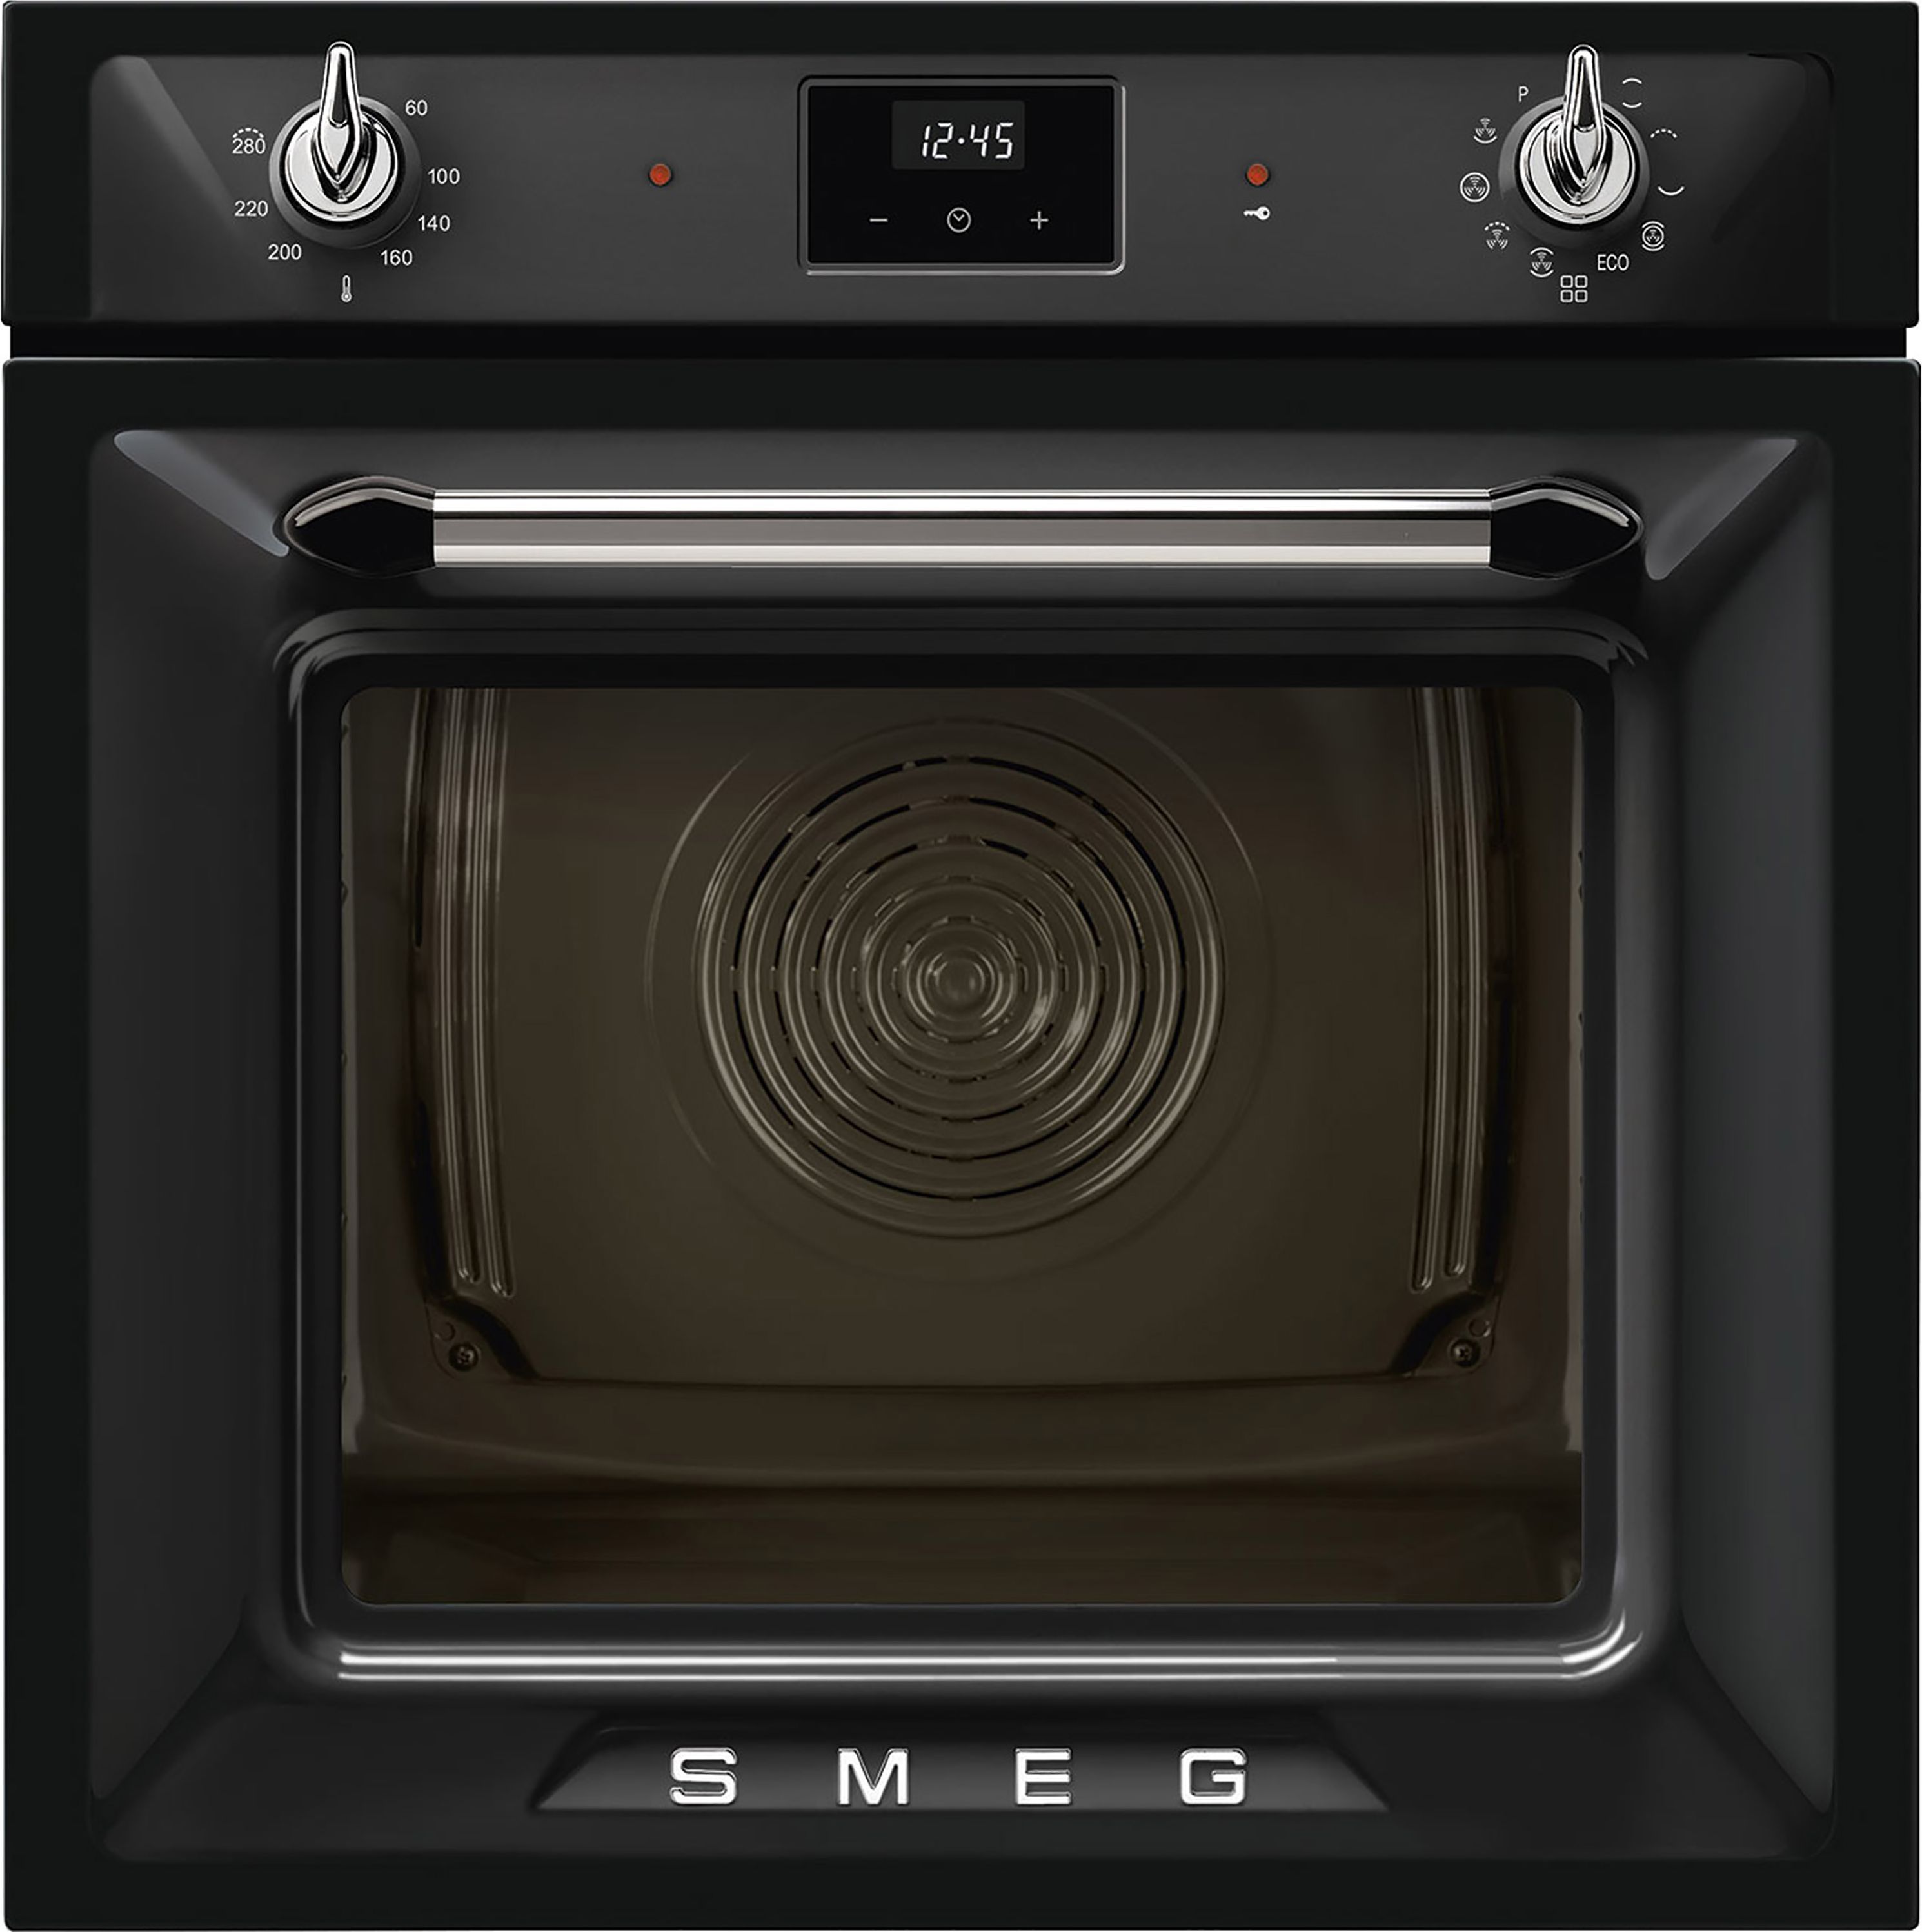 Smeg Victoria SOP6900TN Built In Electric Single Oven with Pyrolytic Cleaning - Black - A Rated, Black